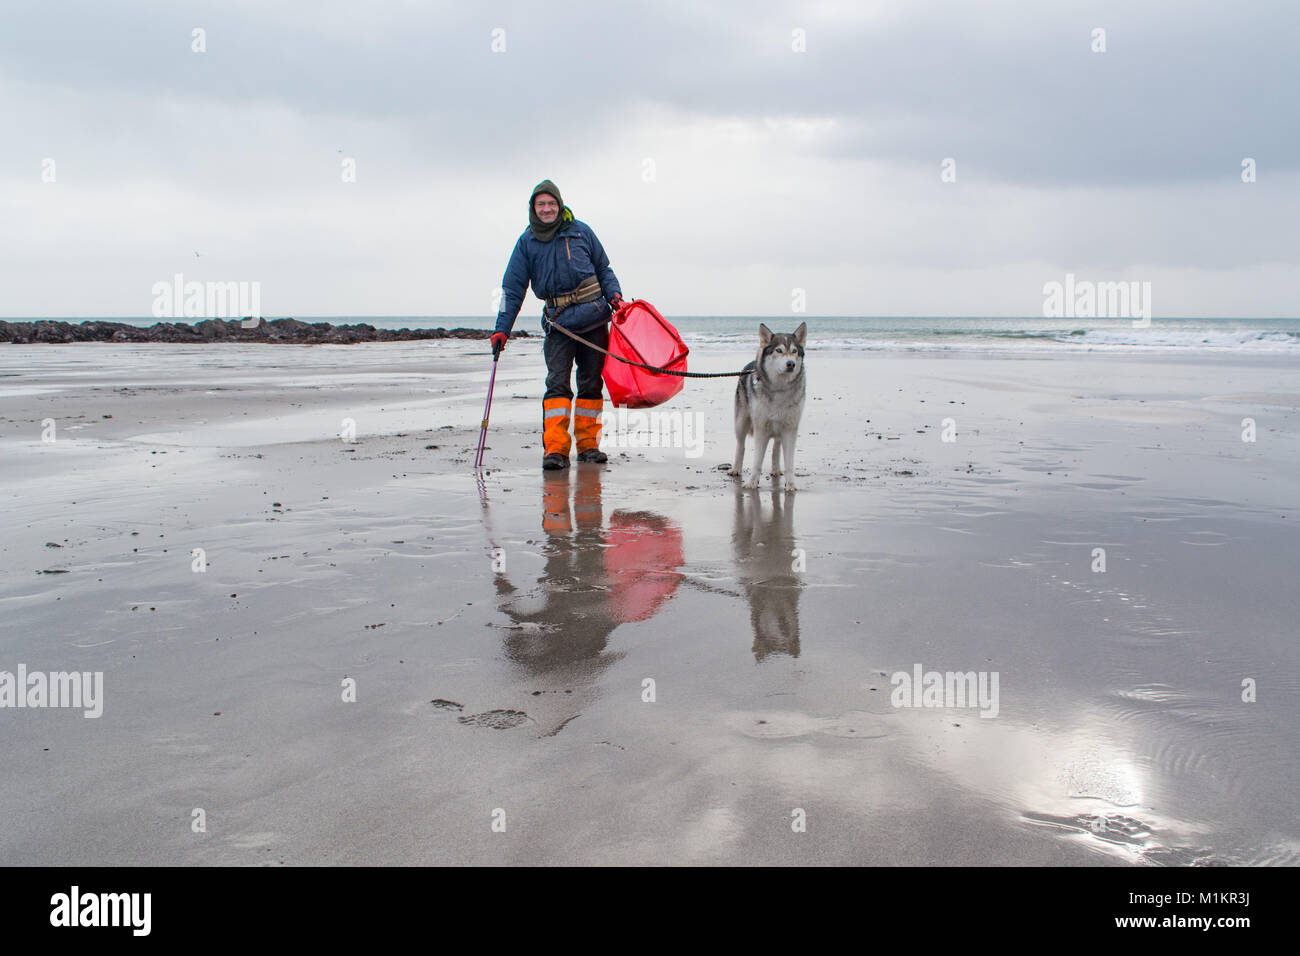 Kennack Sands, Lizard Peninsula, Cornwall, UK. 31st Jan 2018. Wayne Dixon former soldier and support worker originally from Bradford  back on the coast path cleaning up as Wayne and his northern Intuit dog Koda, walk round the coast of the UK. They set off on the 1/2/2016 raising funds for the charity MIND and the northern inuit rescue dog society. Wayne is also passionate about raising awareness on the value of keeping  britain tidy. Todays beach clean was organised by the Seal Sanctuary at Gweek. Credit: Simon Maycock/Alamy Live News Stock Photo